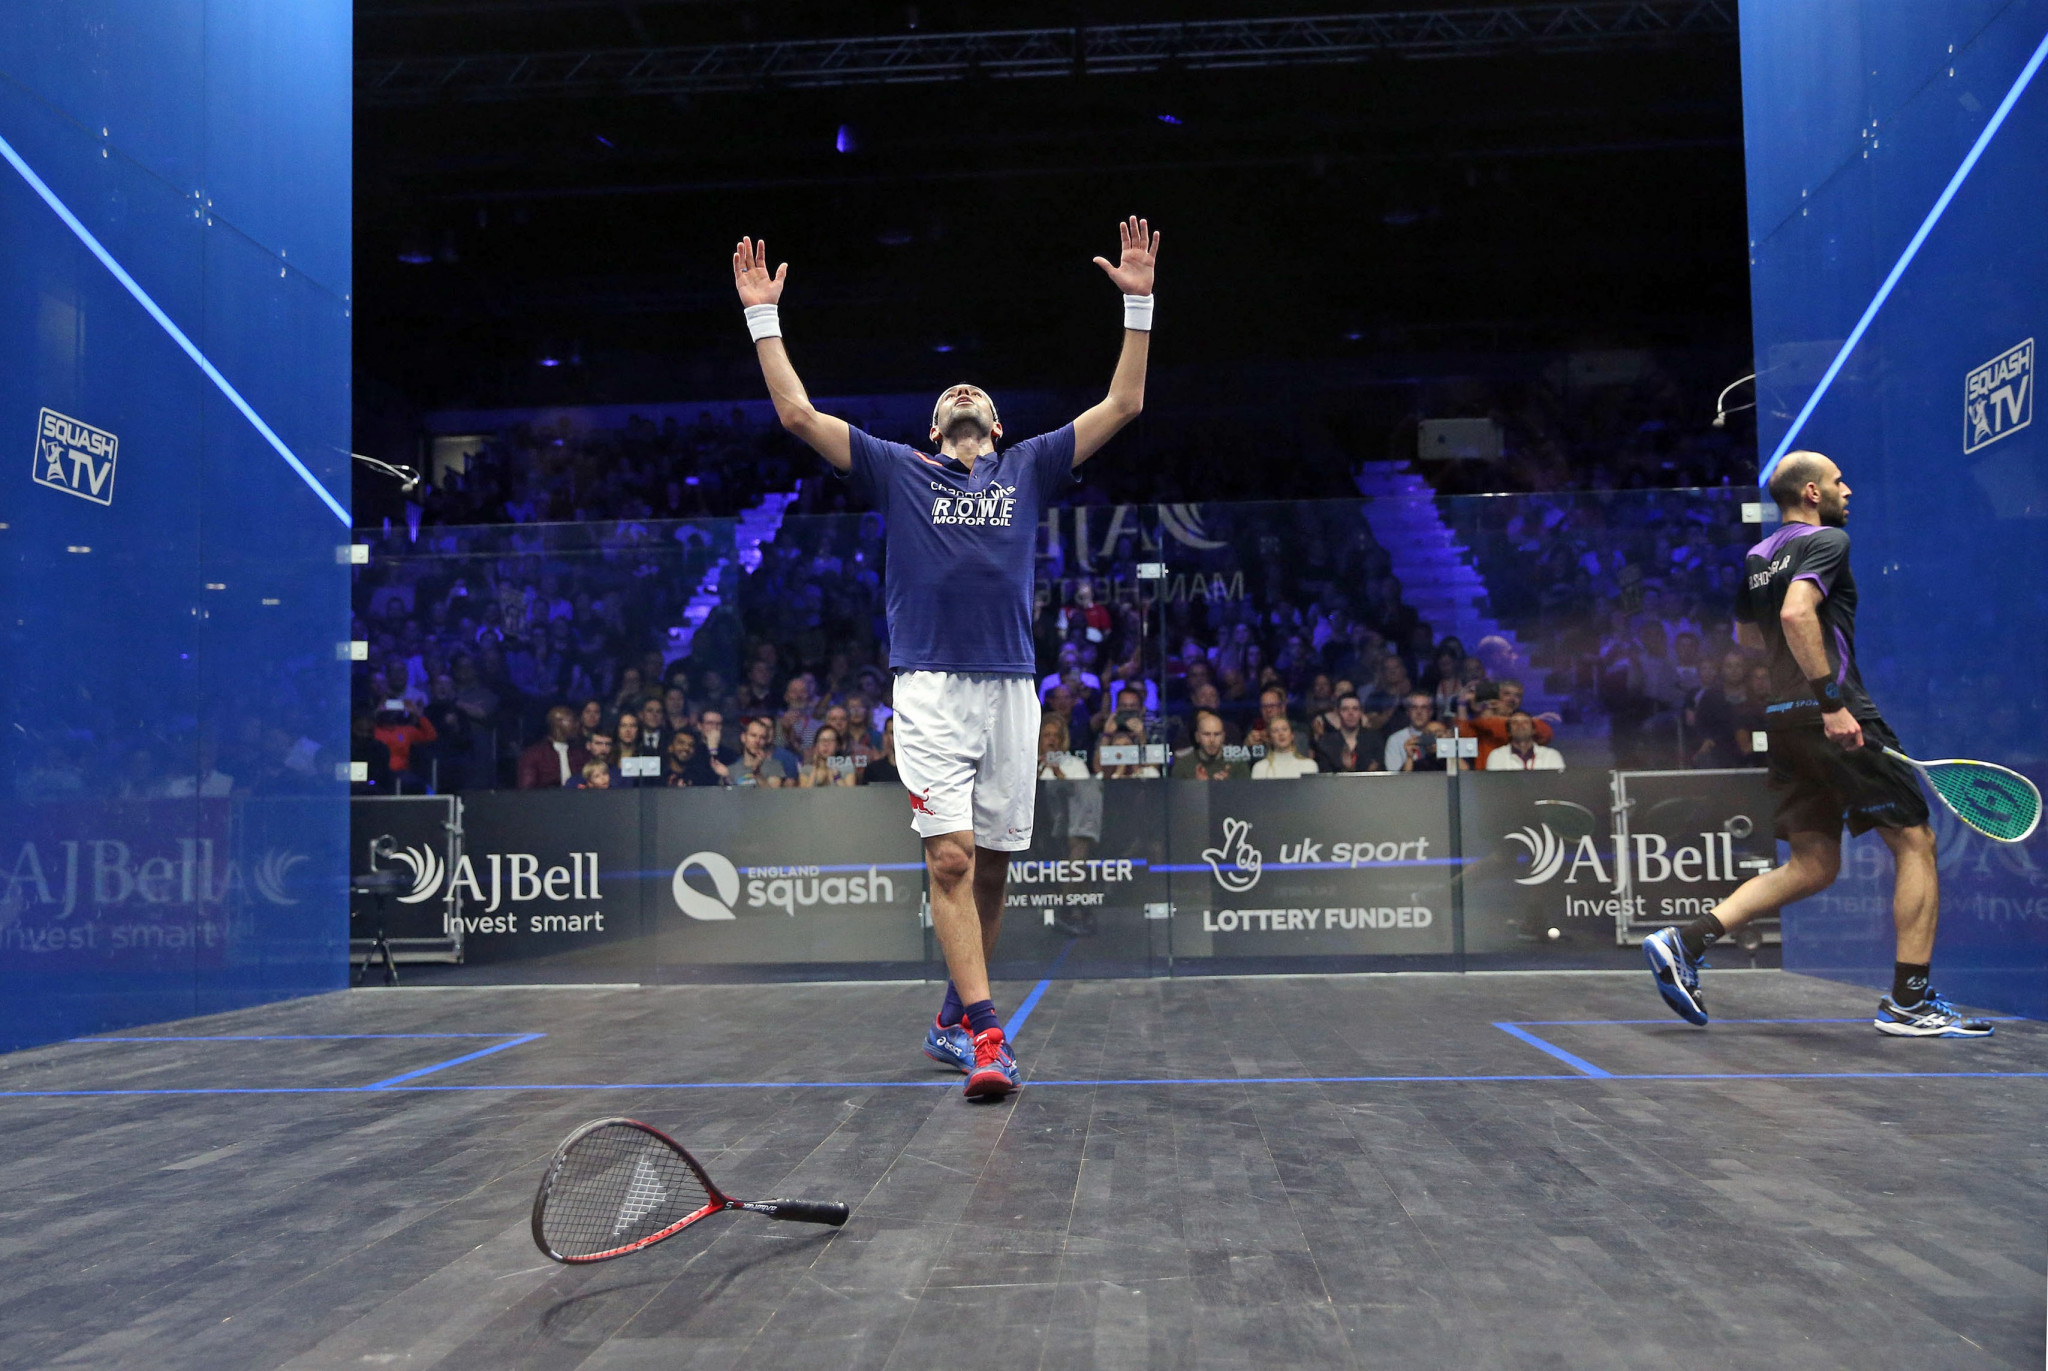 Under the new look, the PSA World Tour will continue to be home to the World Championships ©PSA